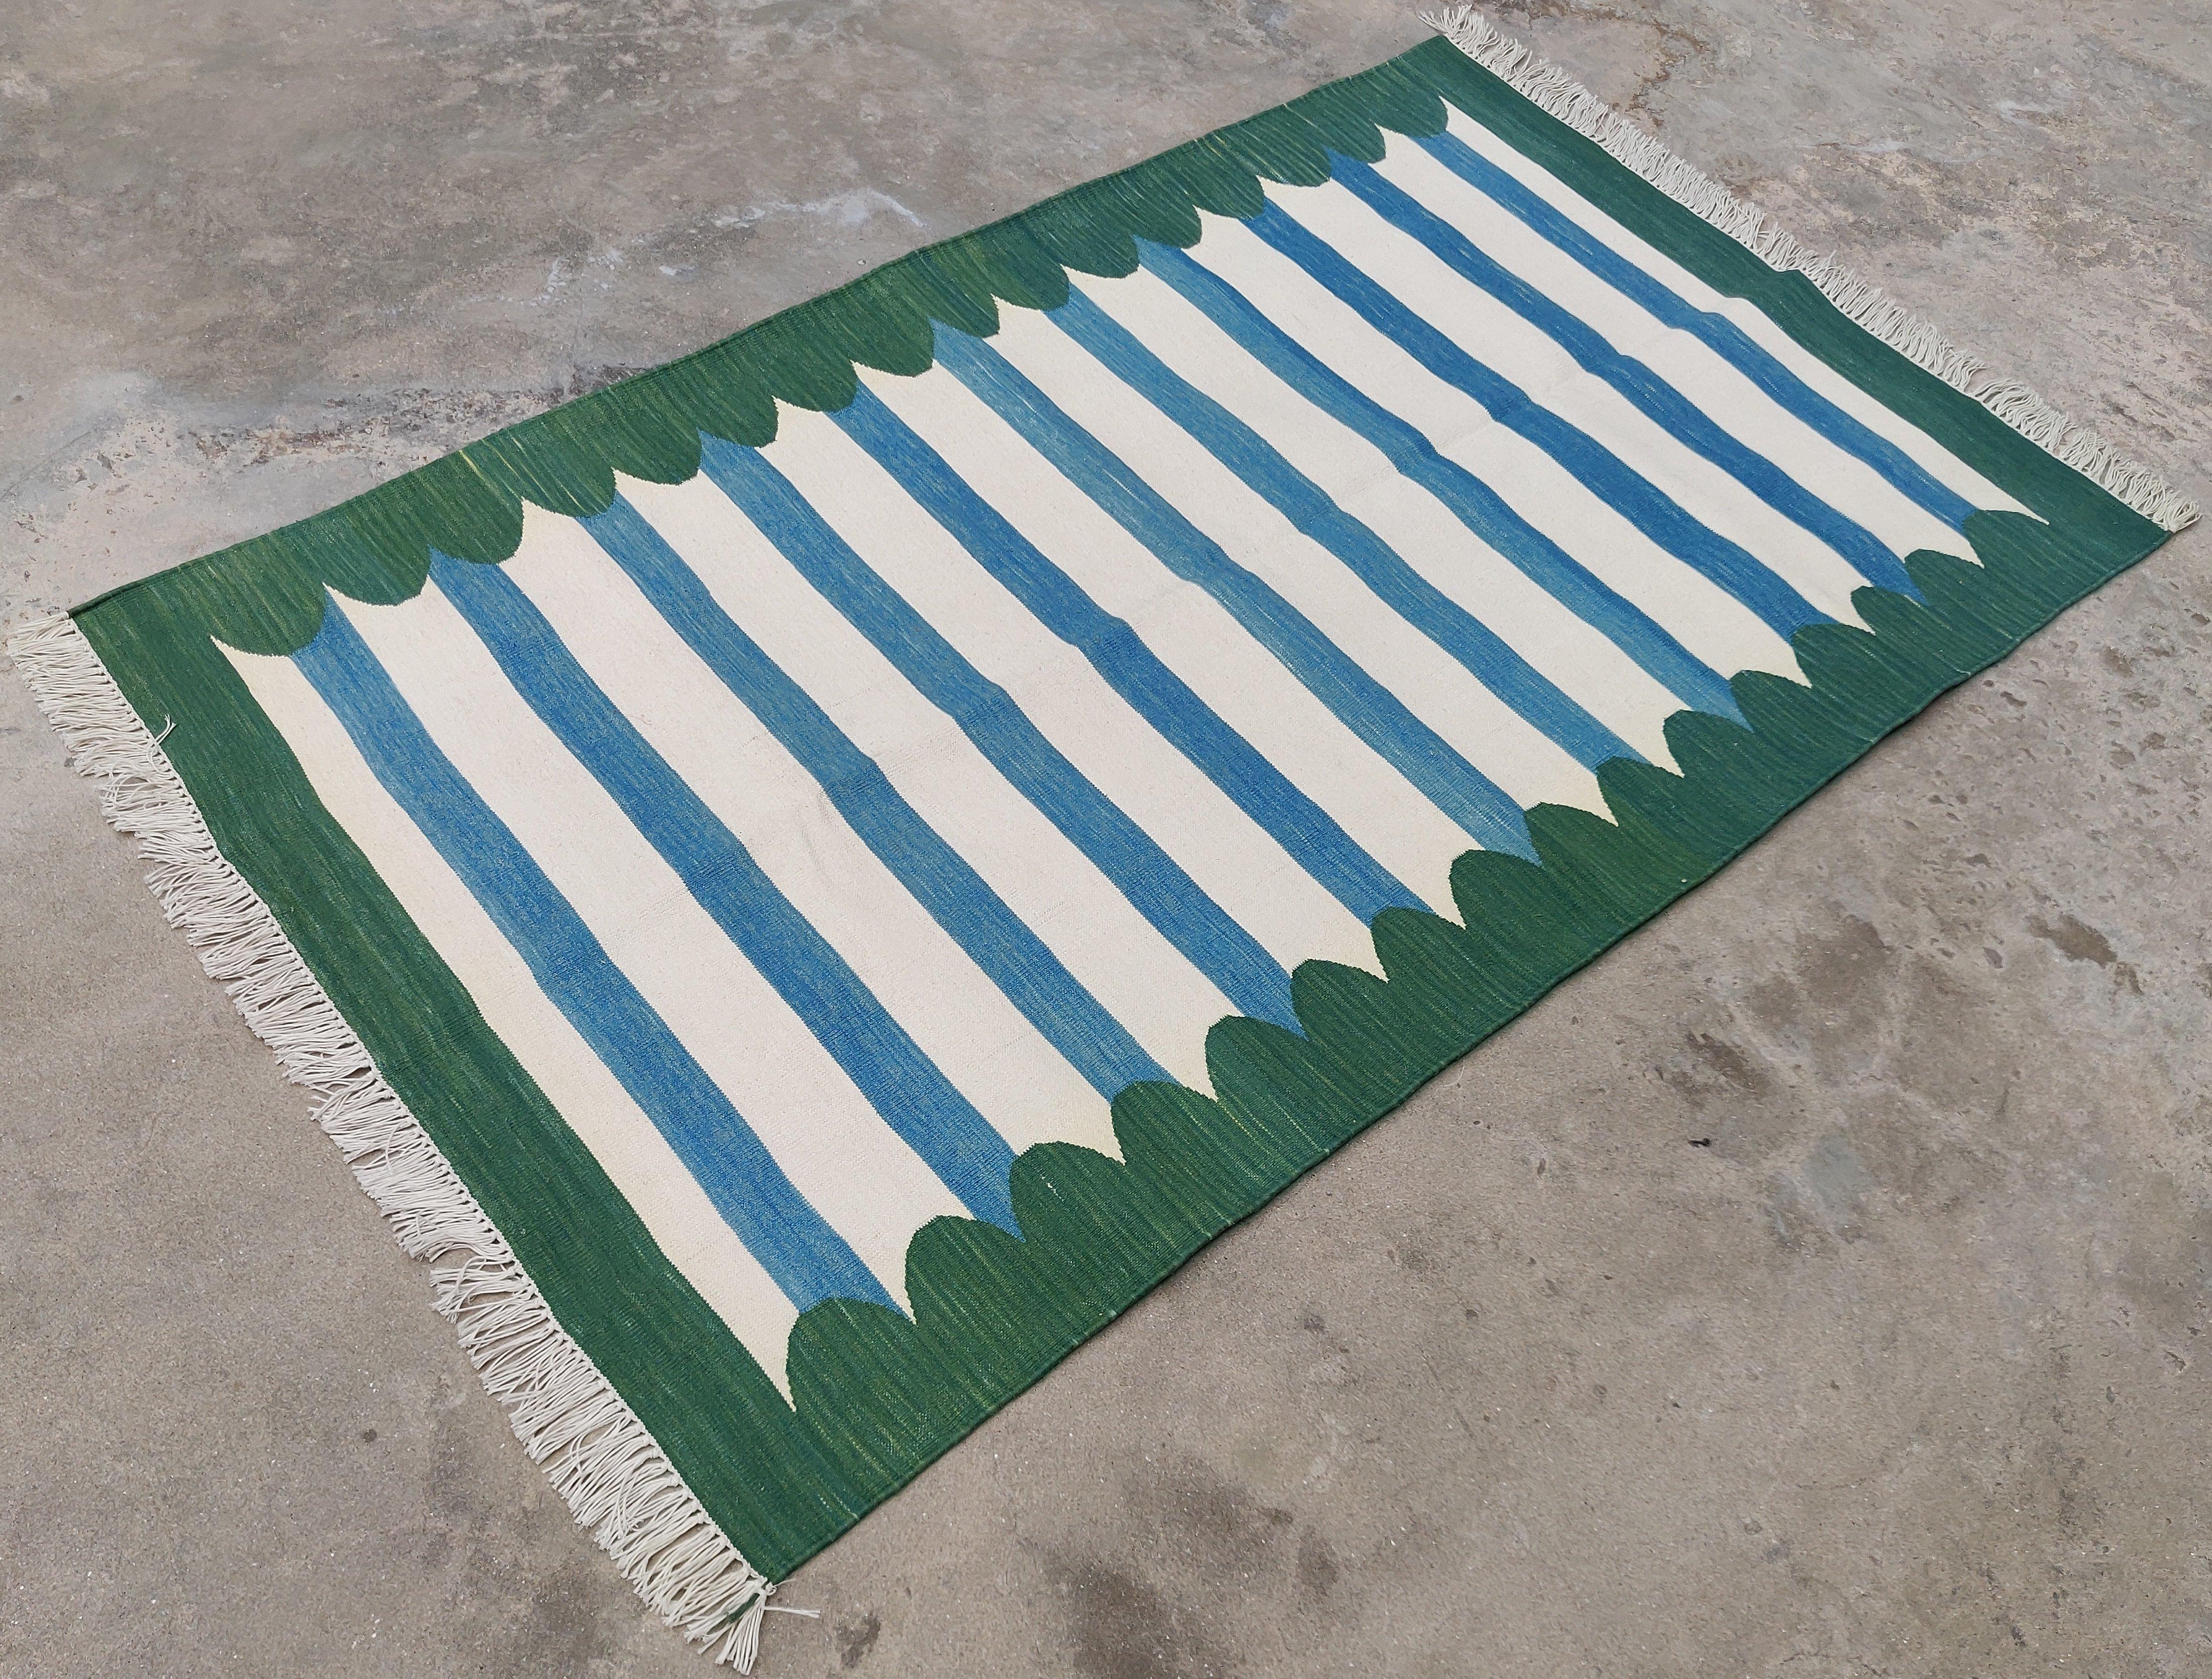 Cotton Vegetable Dyed Blue And Forest Green Scalloped Striped Indian Dhurrie Rug-3'x5' 
These special flat-weave dhurries are hand-woven with 15 ply 100% cotton yarn. Due to the special manufacturing techniques used to create our rugs, the size and